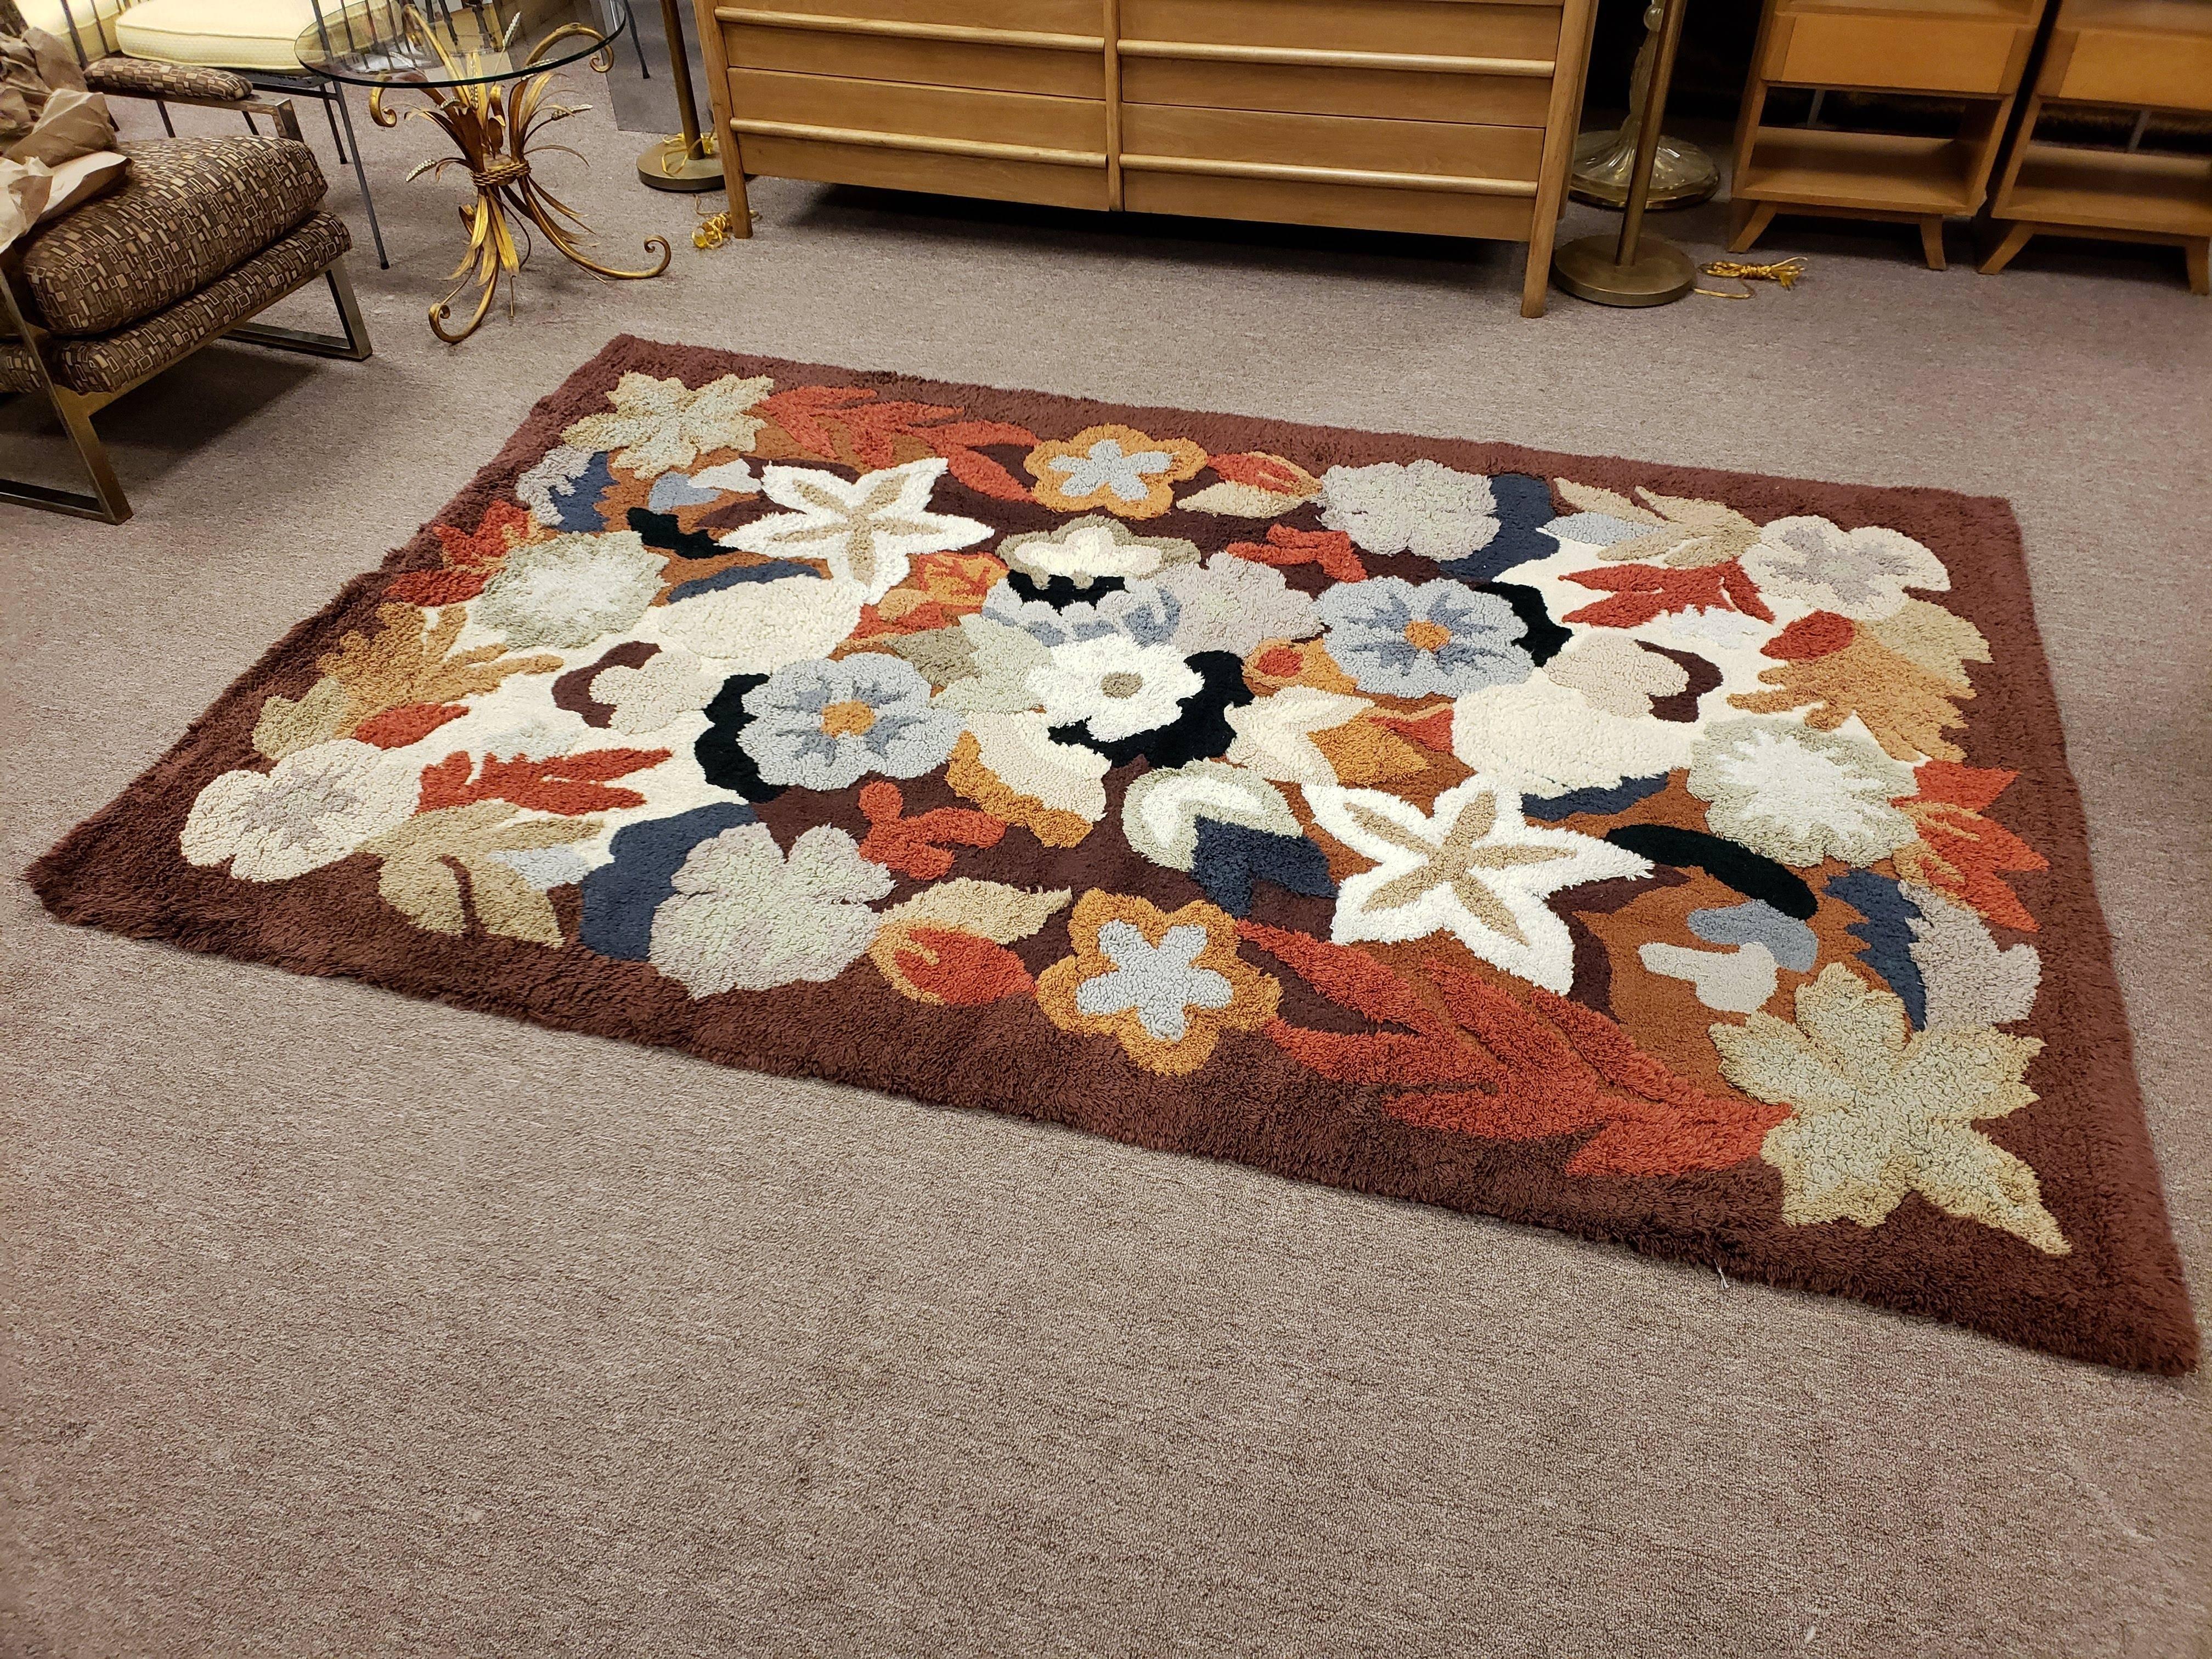 American Mid-Century Modern 1960s Floral Motif Hand-Knotted Wool Rug